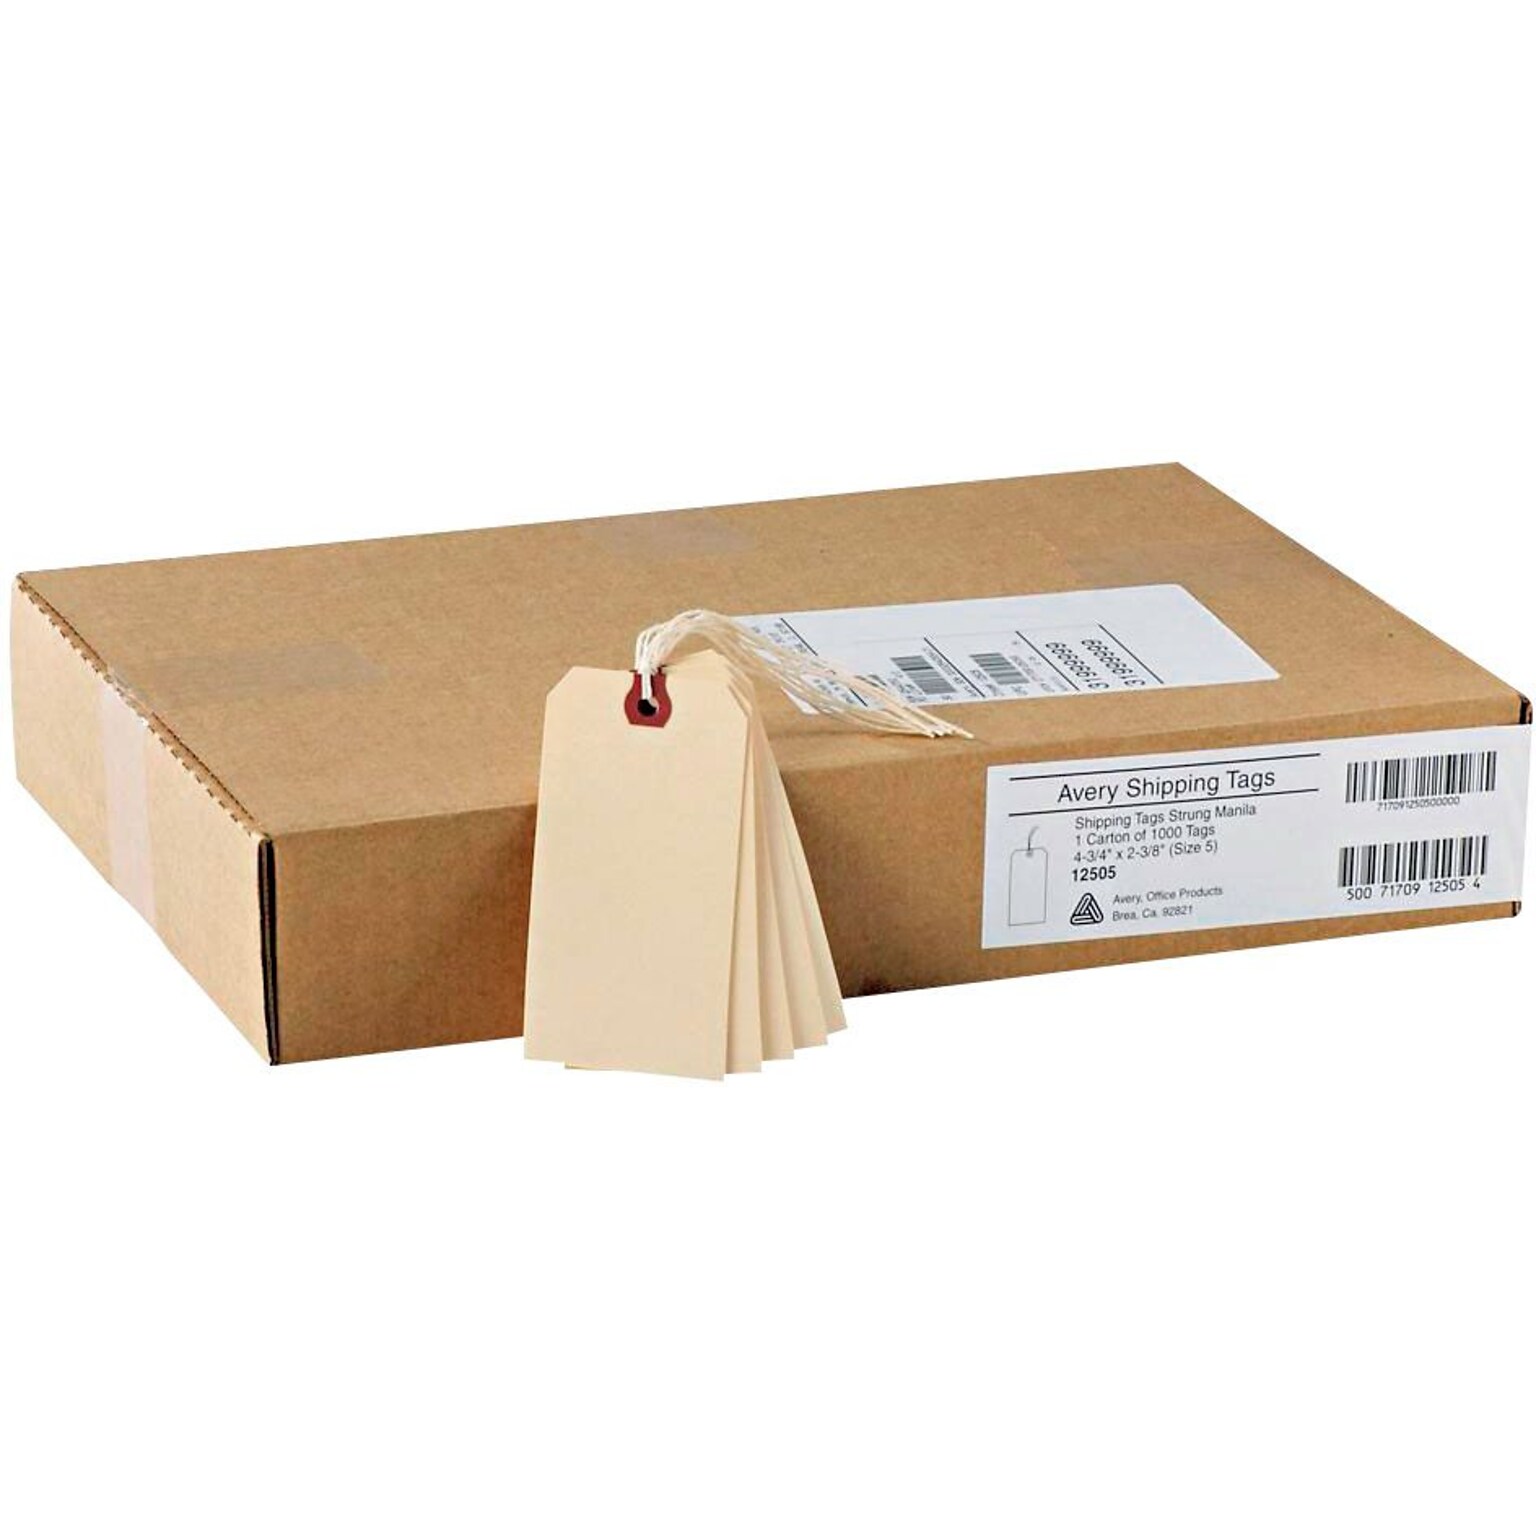 Shipping Tags With String, #5, 4-3/4x2-3/8, Manila, 1,000/Box